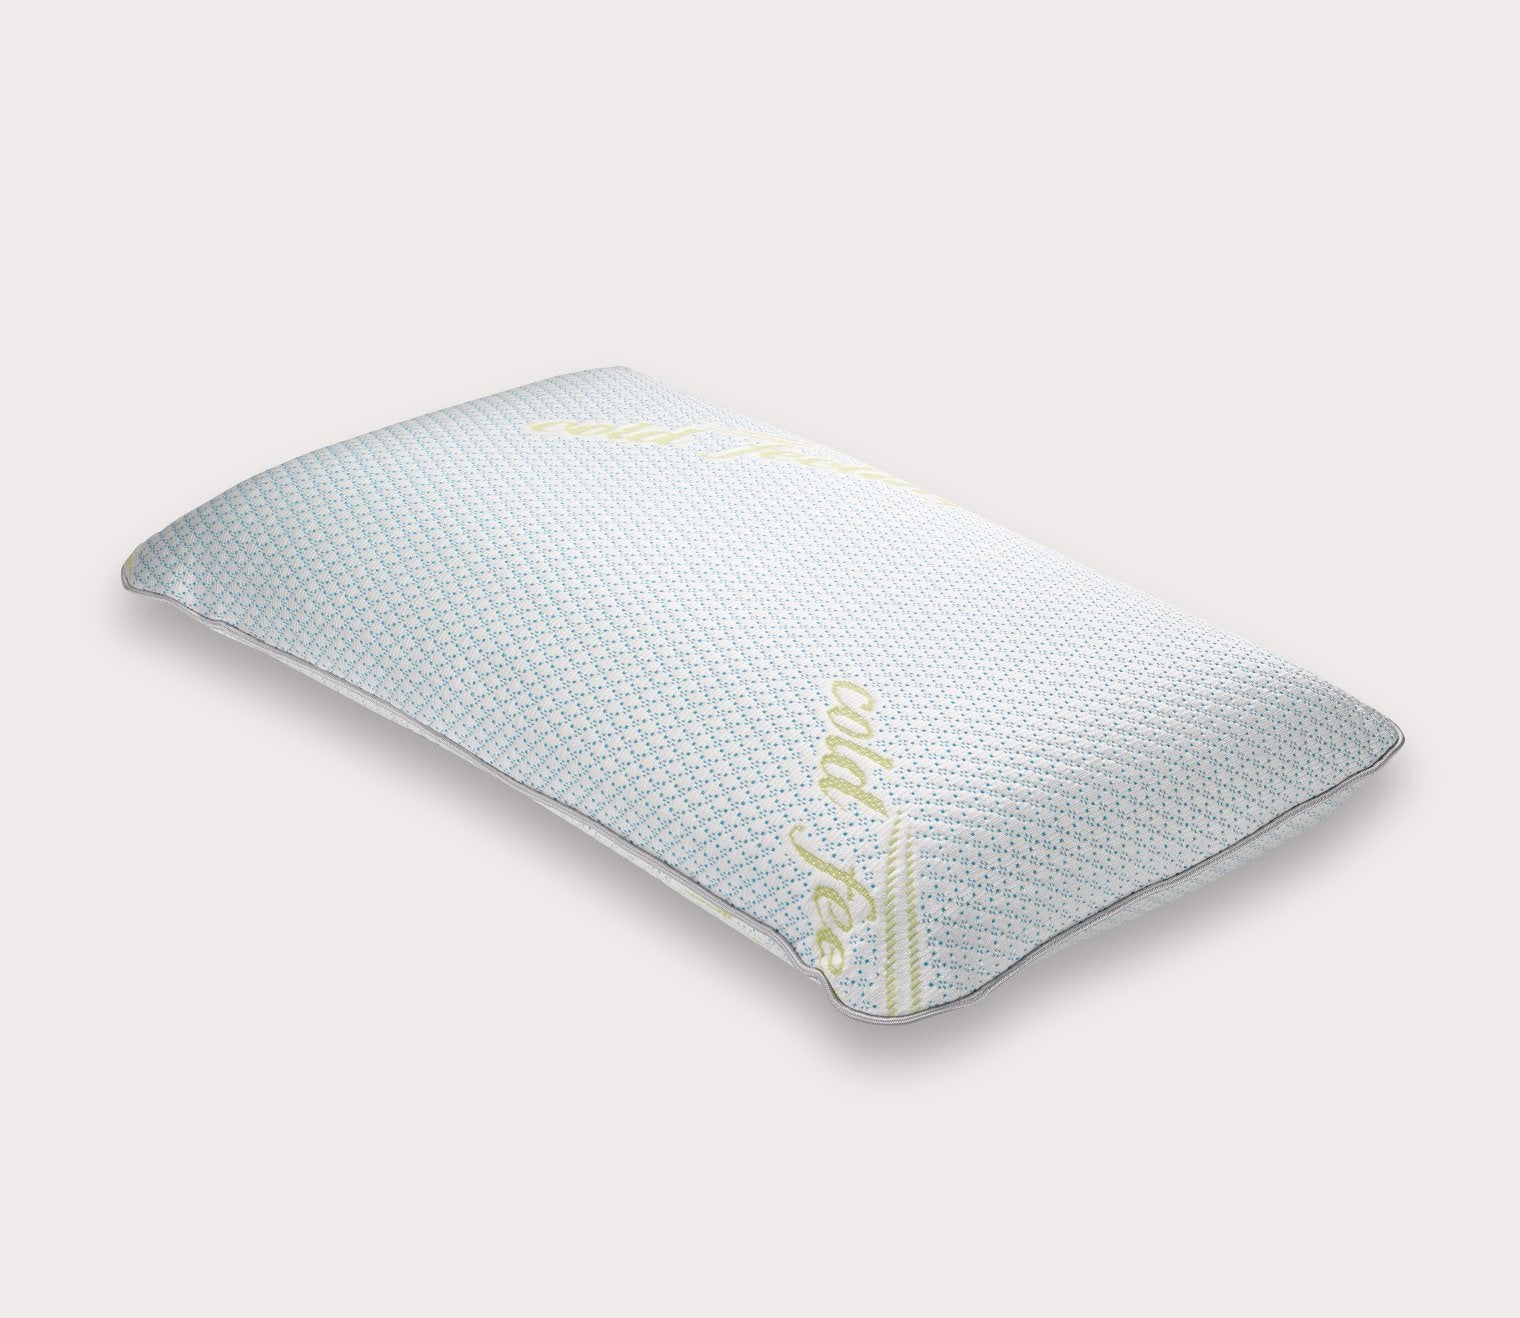 https://cdn.shopify.com/s/files/1/2420/9425/products/remarkable-ice-silk-memory-foam-ventilated-pillow-by-tmi-229192.jpg?v=1636643048